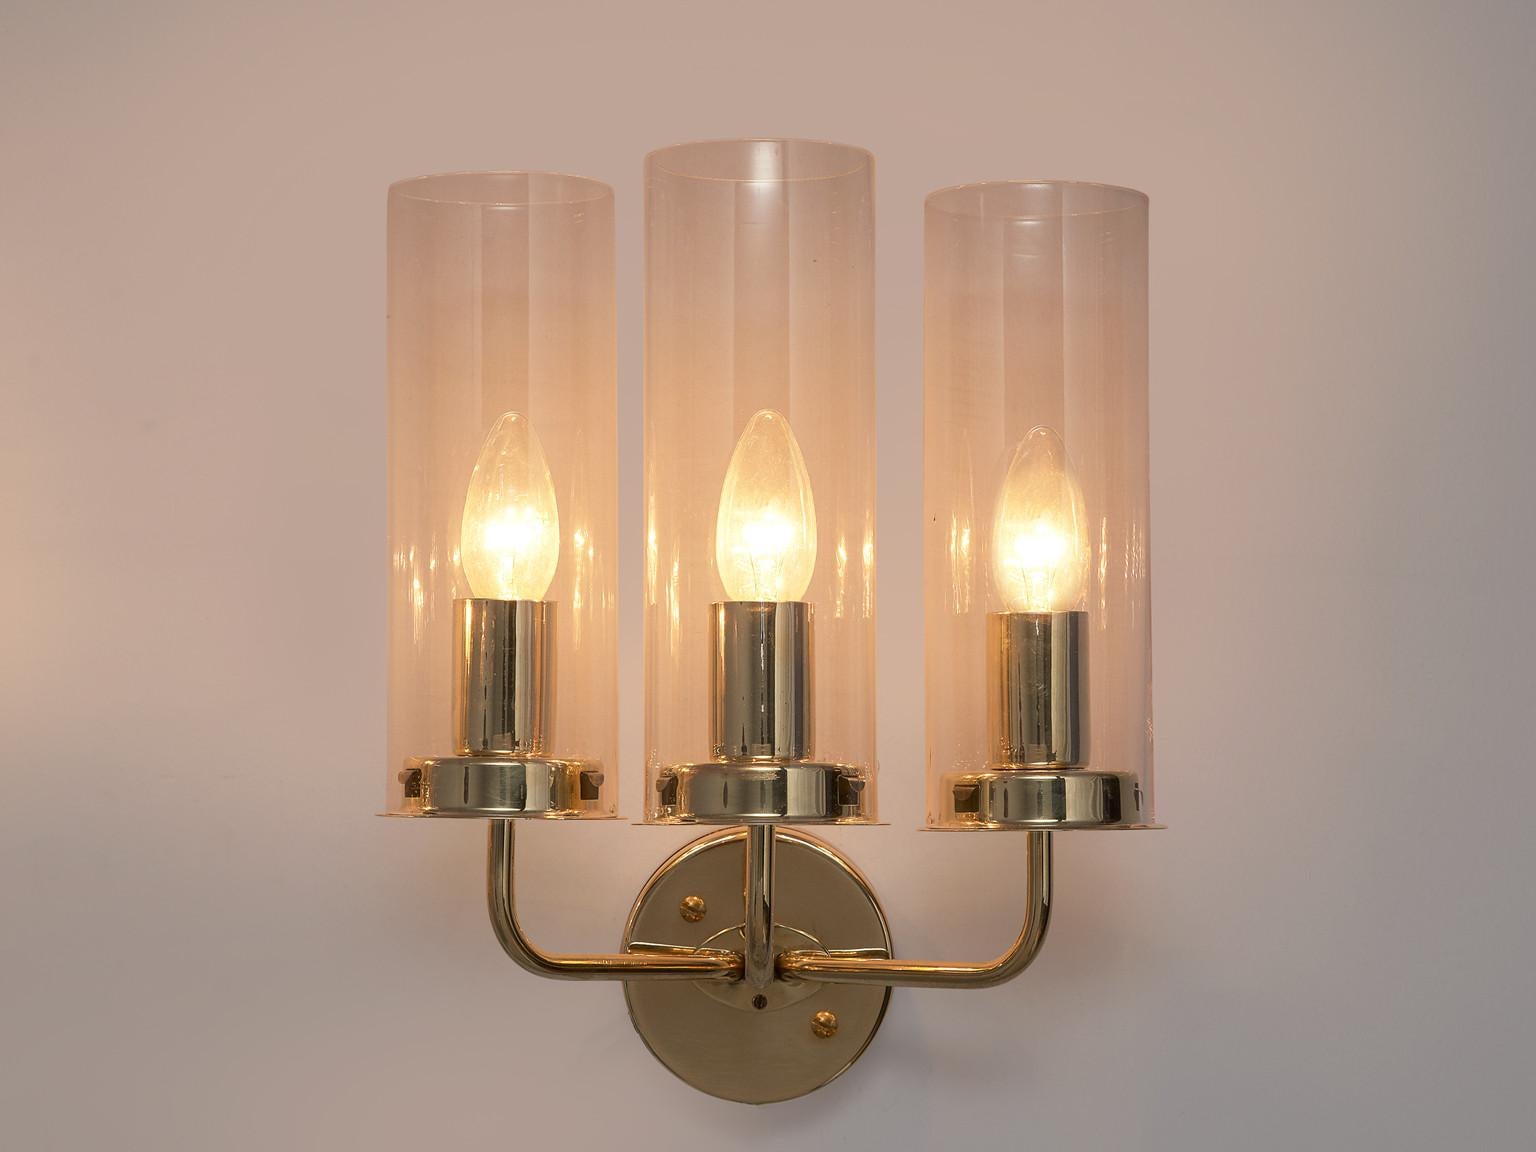 Hans-Agne Jakobsson for Hans-Agne Jakobsson AB in Markaryd, 'Sonata' wall lights, brass, glass, Sweden, 1960s

Elegant wall lights designed by Hans-Agne Jakobsson. This classic lamp features a round fixture with three arms that each hold a cylindric